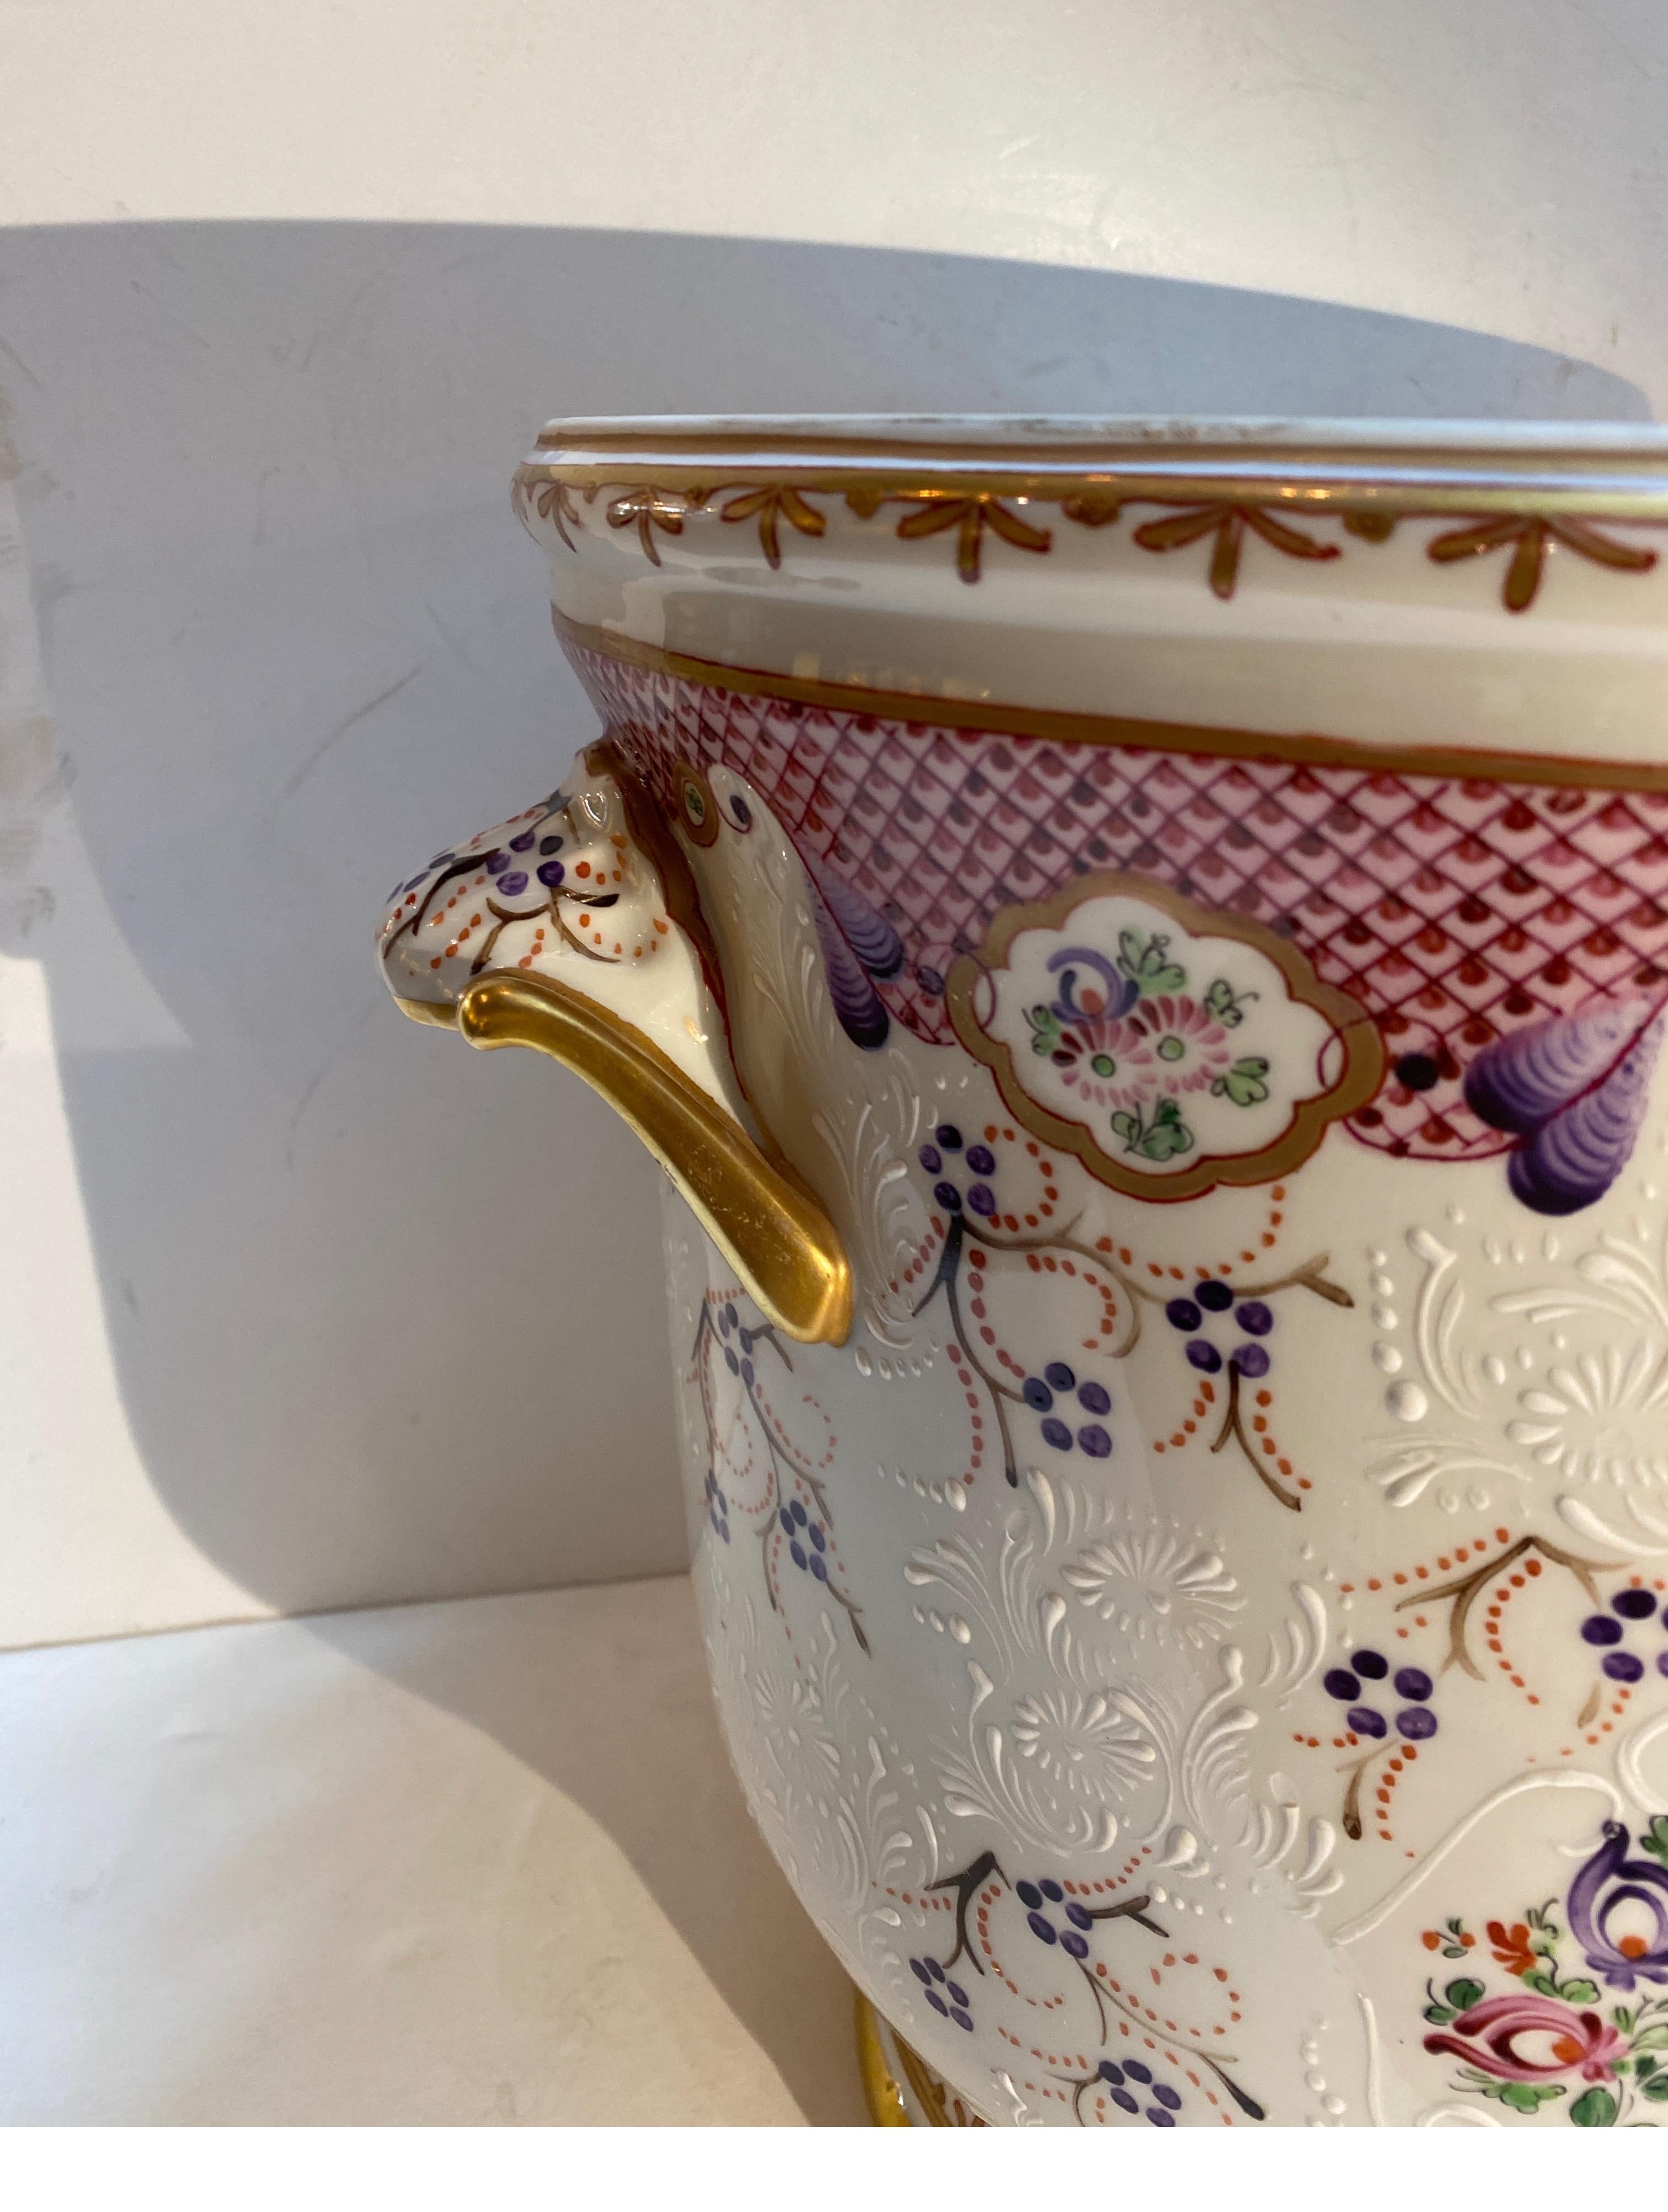 Beautiful hand painted French porcelain planter jardinière by Edme Samson, 19th century. The beautifully decorated large pot is in a Chinese Export style with an Armorial design on one side and a floral pattern on the other with hand gilt details.